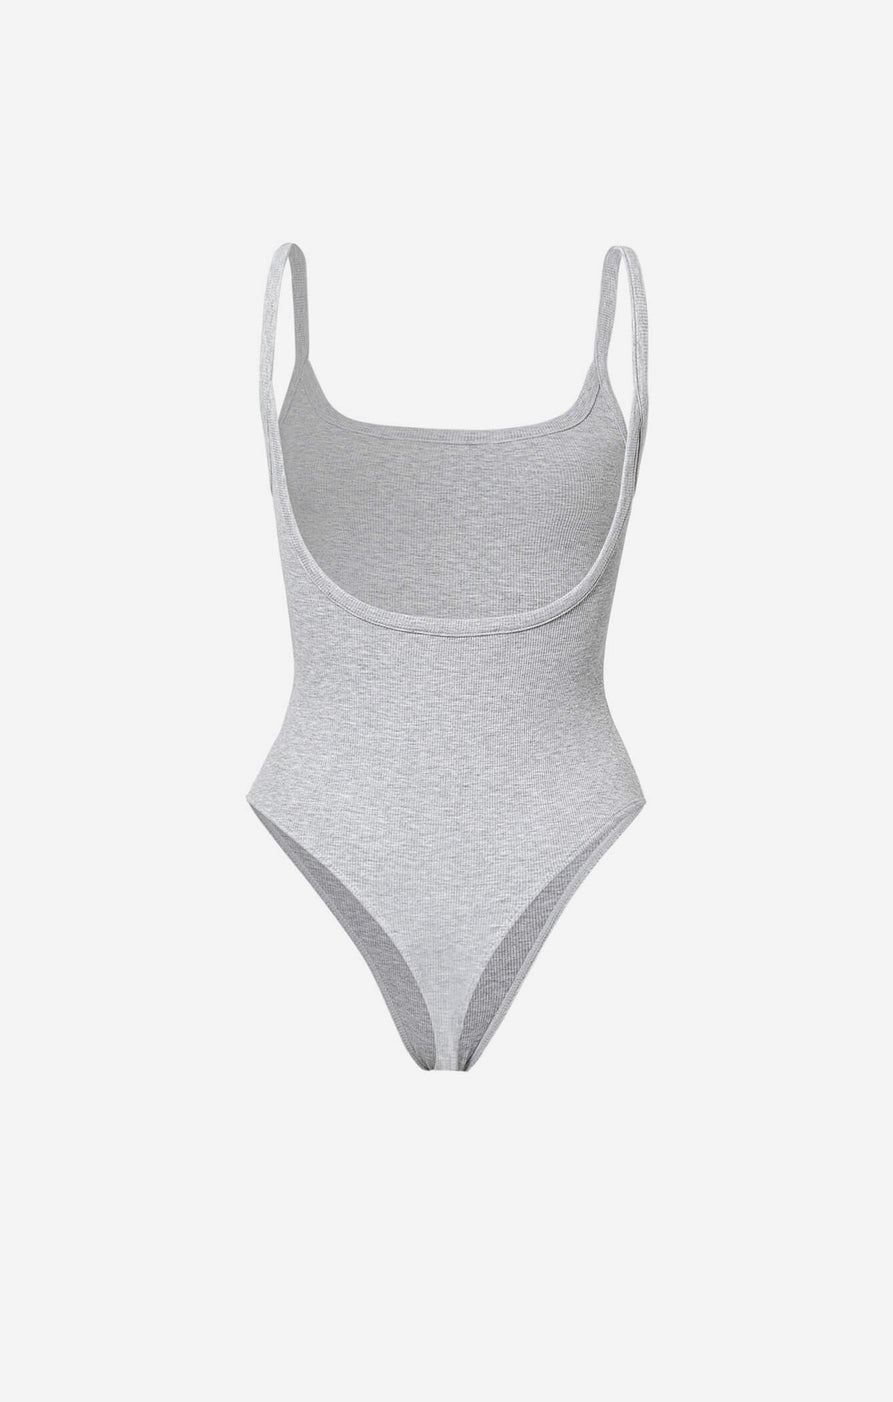 THE LUXE RIB LOW BACK BODYSUIT - MID GREY